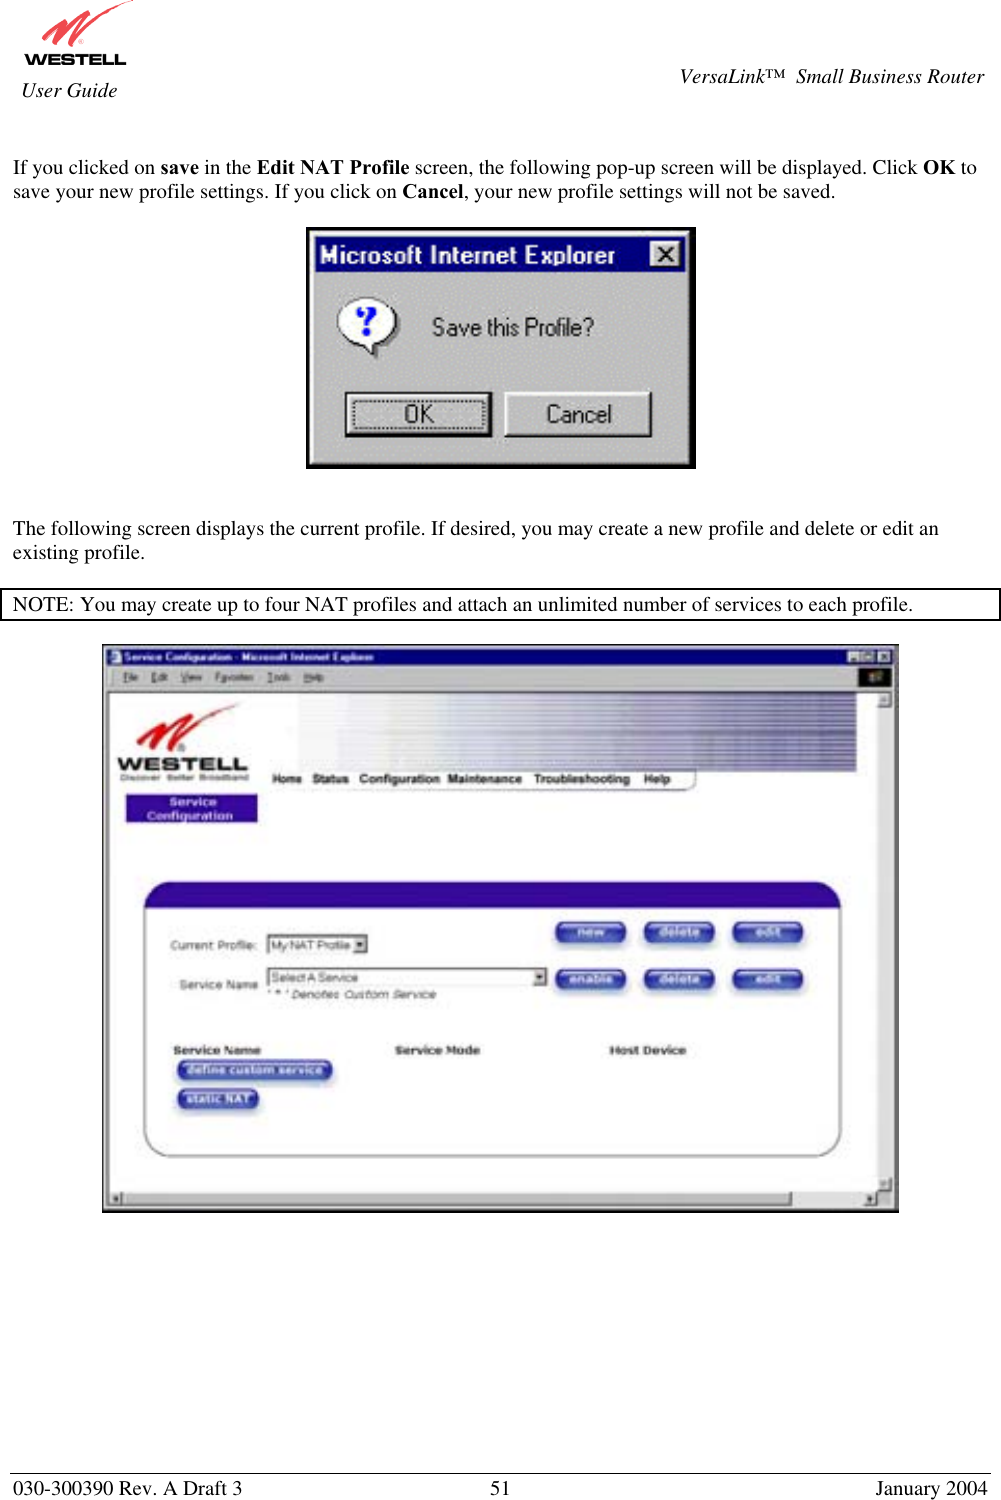       030-300390 Rev. A Draft 3  51  January 2004  VersaLink™  Small Business Router  User Guide  If you clicked on save in the Edit NAT Profile screen, the following pop-up screen will be displayed. Click OK to save your new profile settings. If you click on Cancel, your new profile settings will not be saved.      The following screen displays the current profile. If desired, you may create a new profile and delete or edit an existing profile.  NOTE: You may create up to four NAT profiles and attach an unlimited number of services to each profile.             